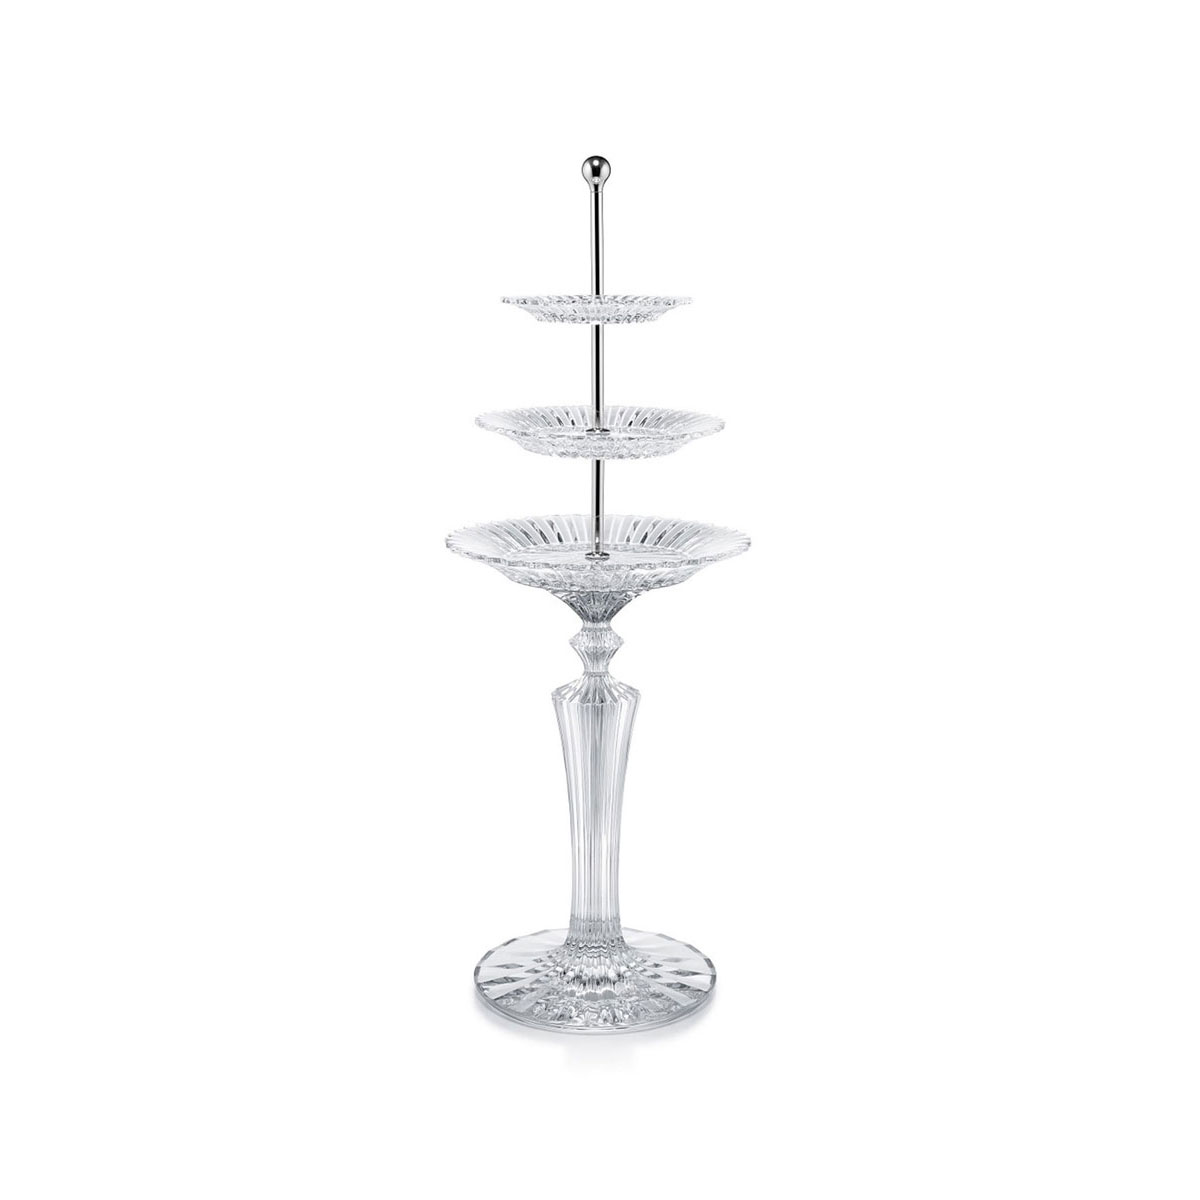 Baccarat Crystal, Mille Nuits Tall 3 Tier Pastry Stand, Large